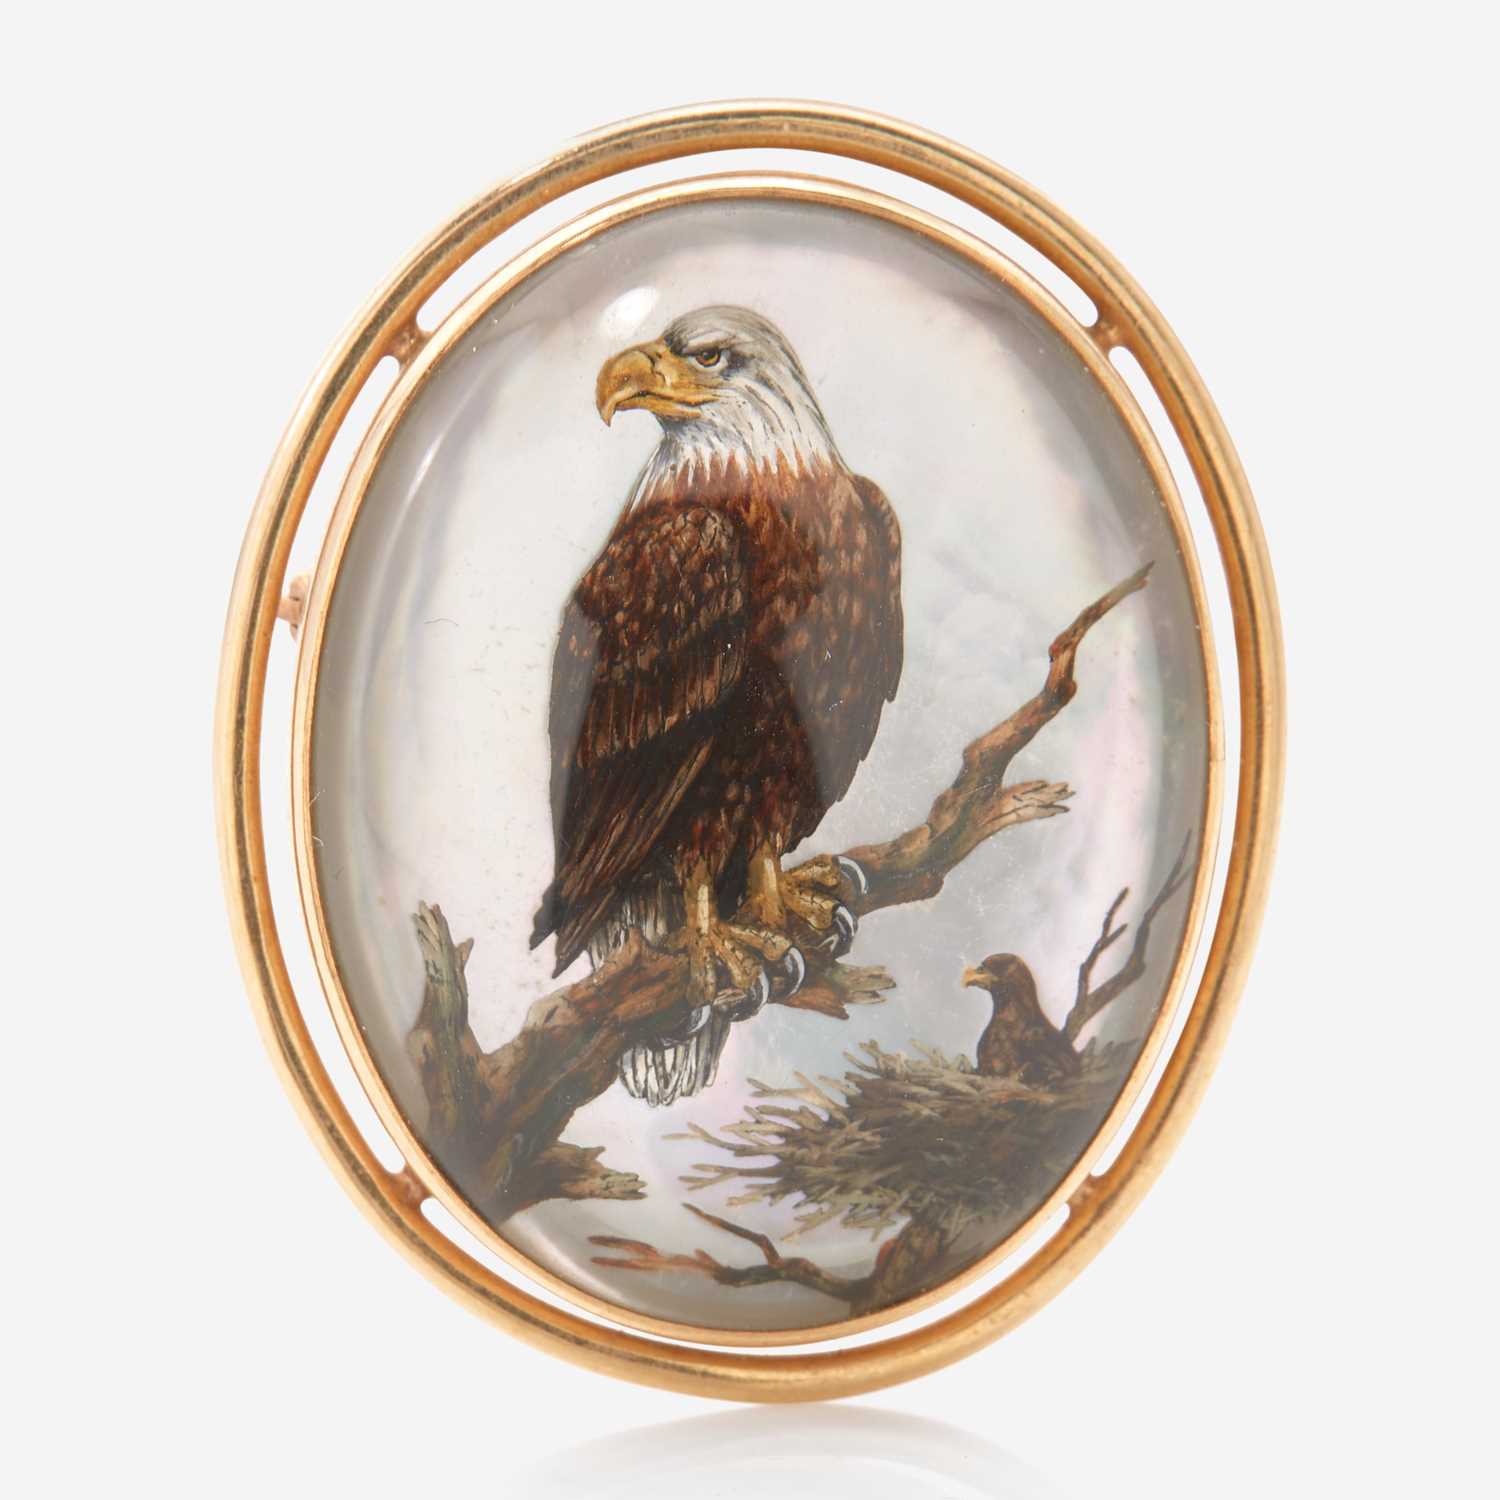 Lot 15 - A 14K Yellow Reverse-Painted Gold Bald Eagle Pin